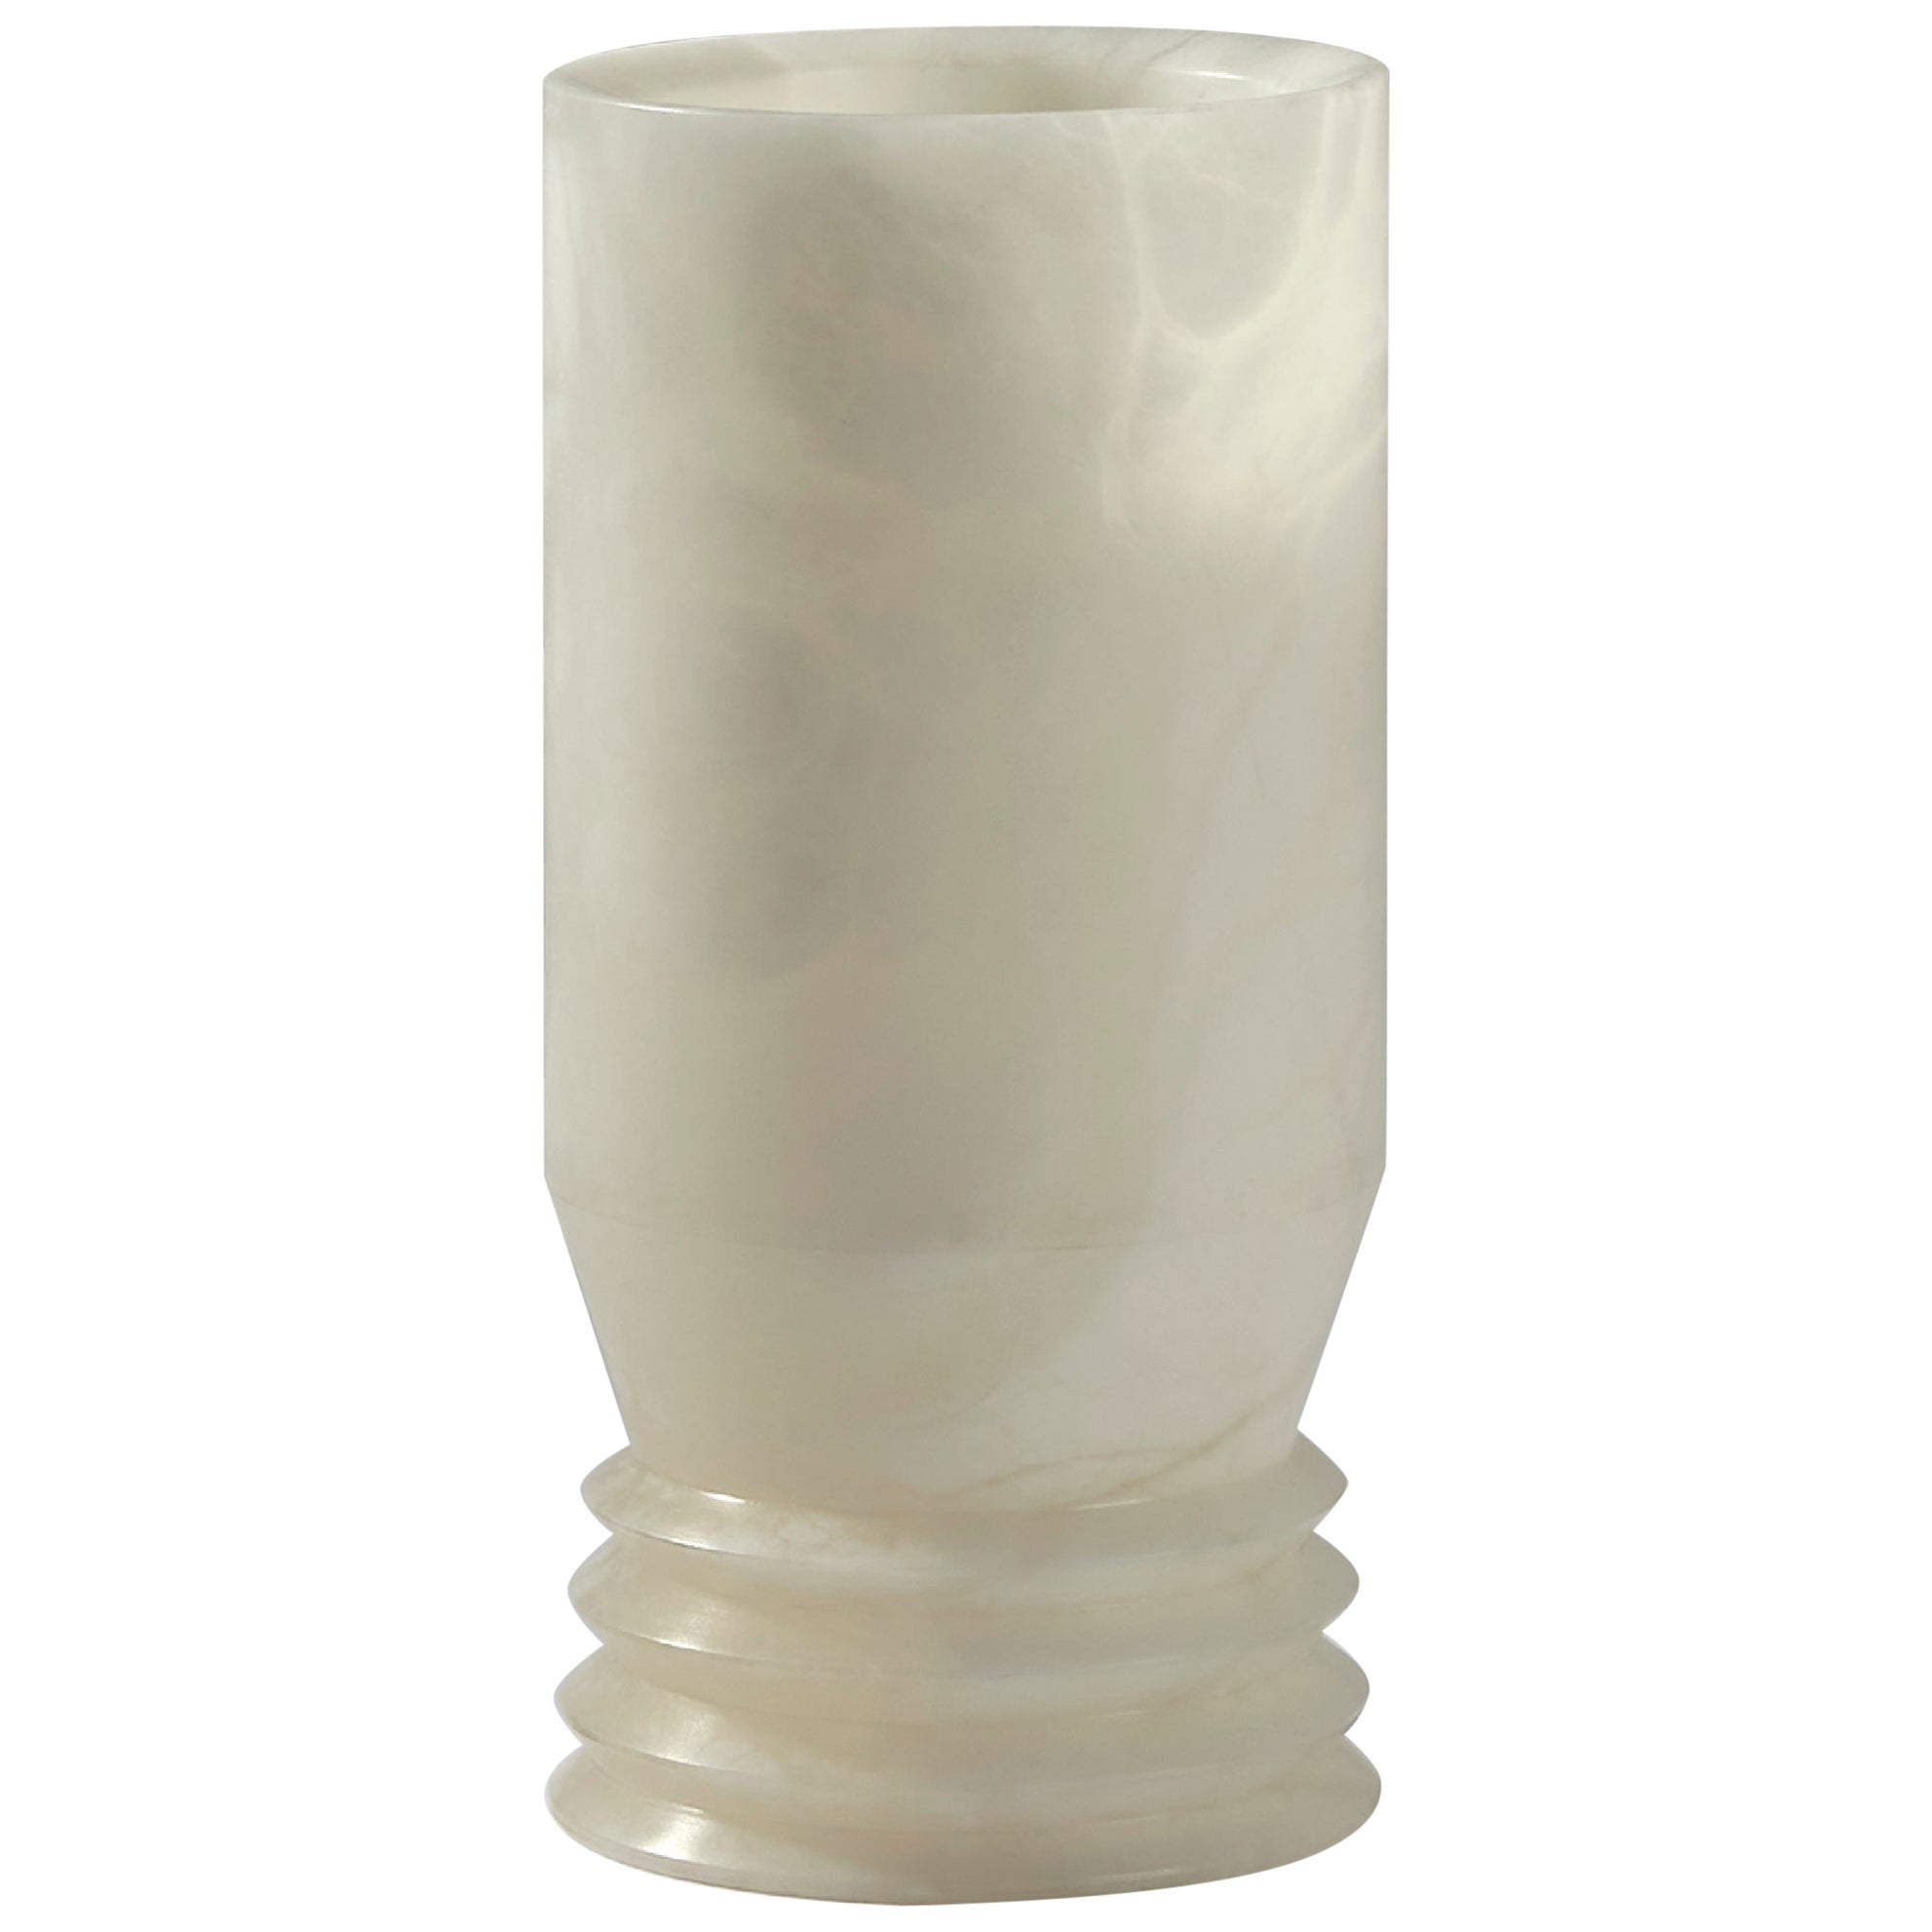 "Strato due" Vase in Tuscan Alabaster by Andrea Grecucci For Sale